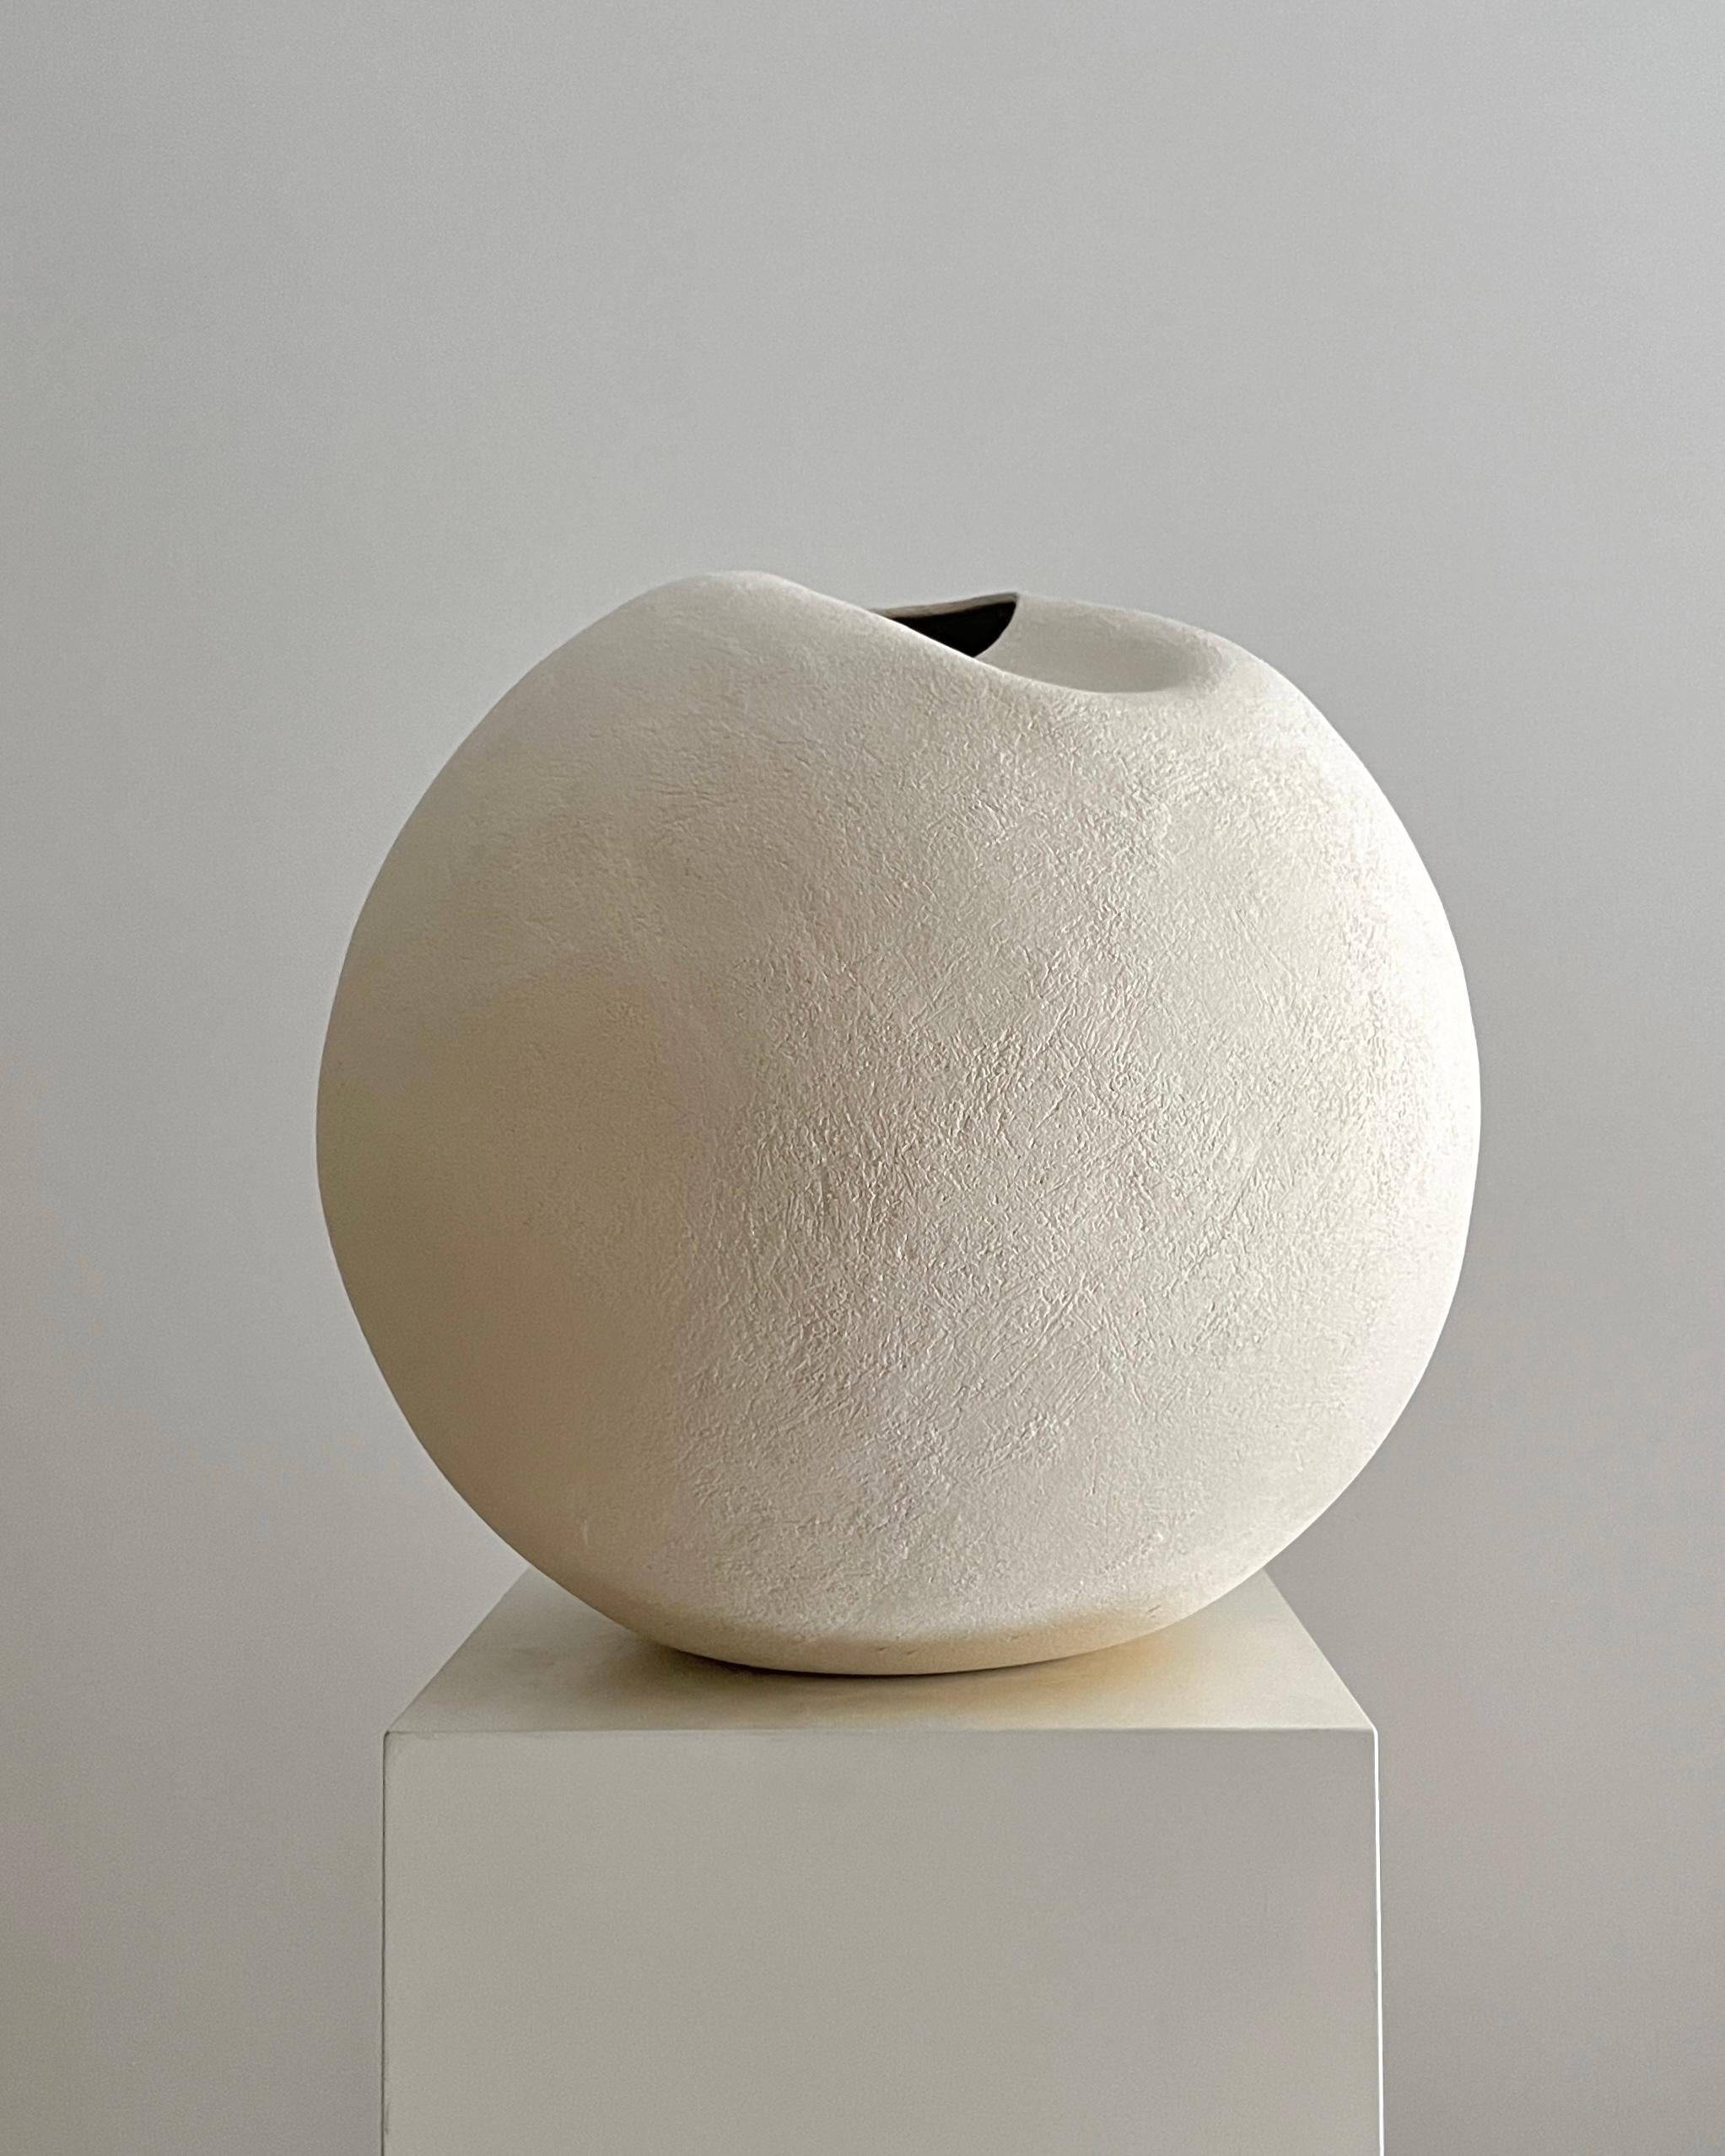 Light Fold Vessel by Laura Pasquino
One of a Kind
Dimensions: D 42 x H 40 cm
Material: Ceramic
Finishing: Textured, Glazed Inside
Artist stamp on the bottom
 
Laura Pasquino
Incorporating references from ancient Korean ceramics as well as principles